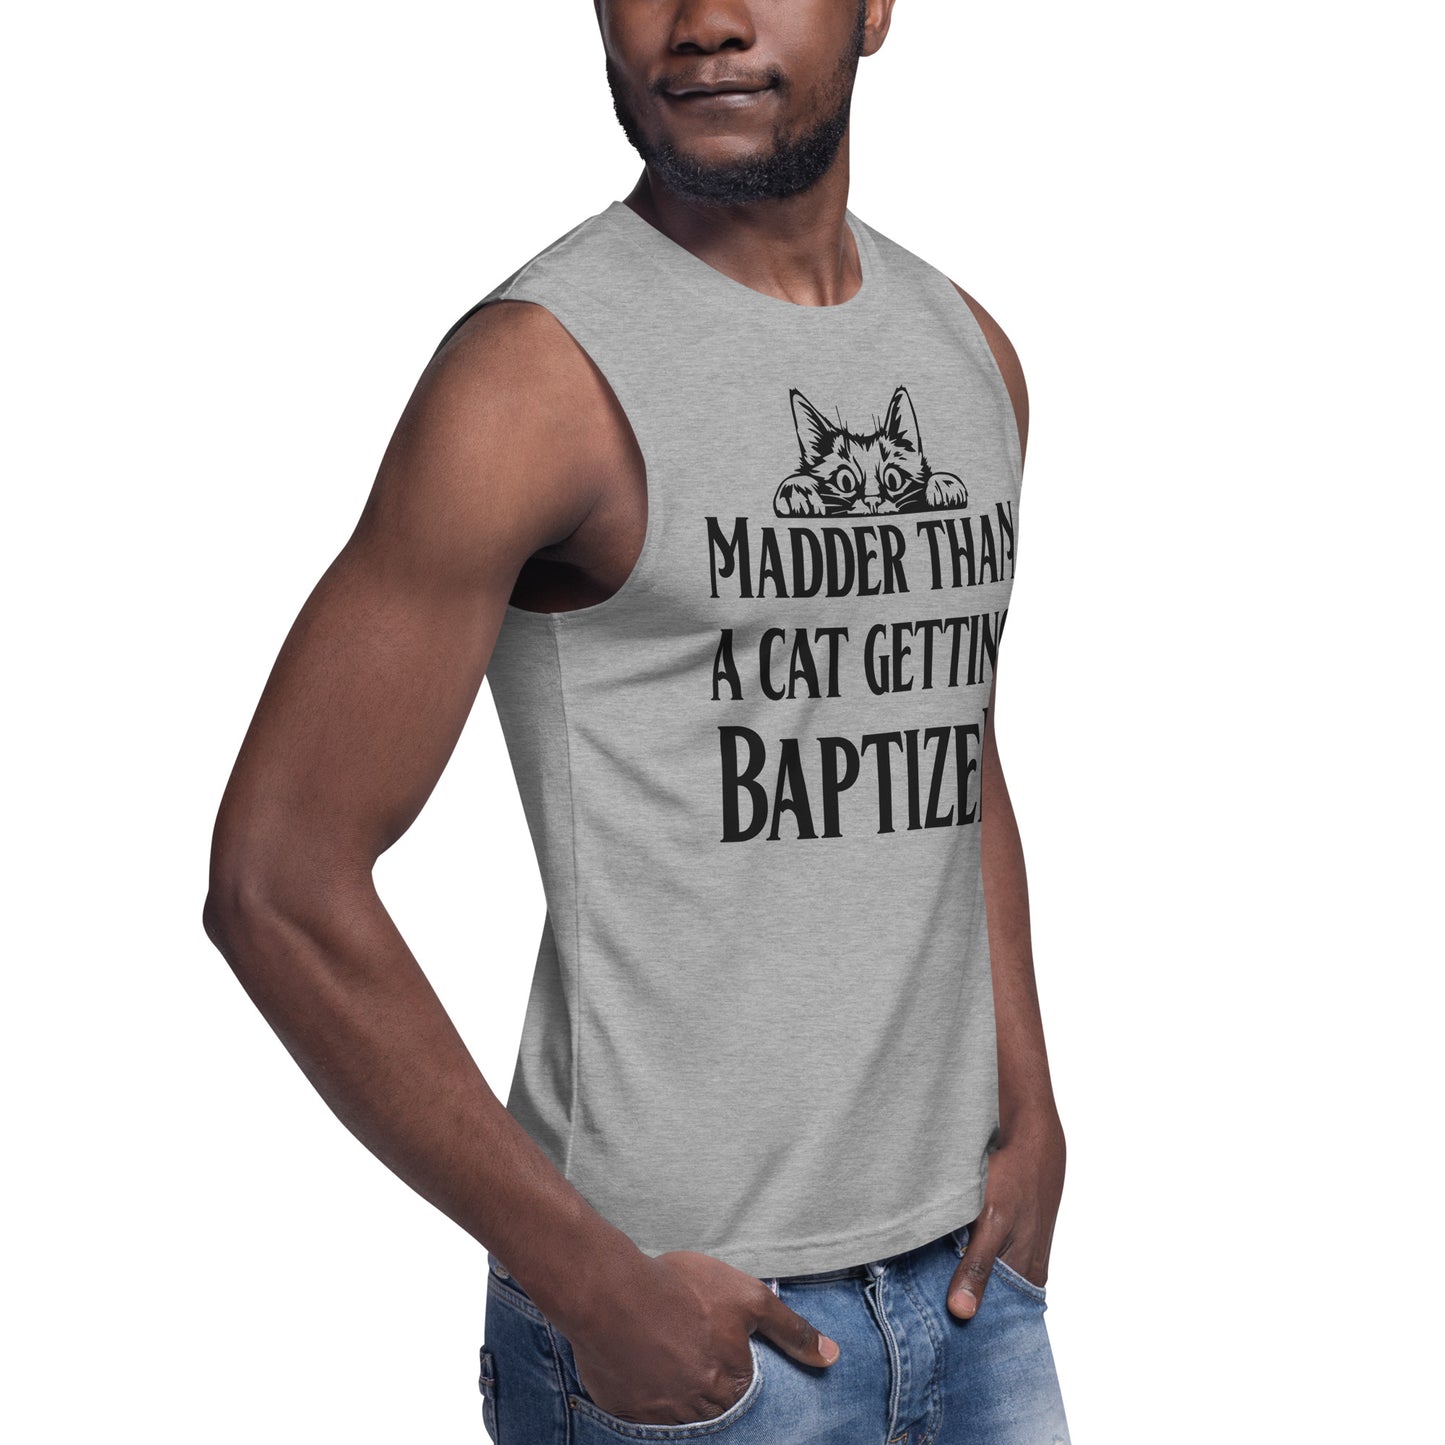 Madder than a Cat Getting Baptized / Unisex Muscle Shirt